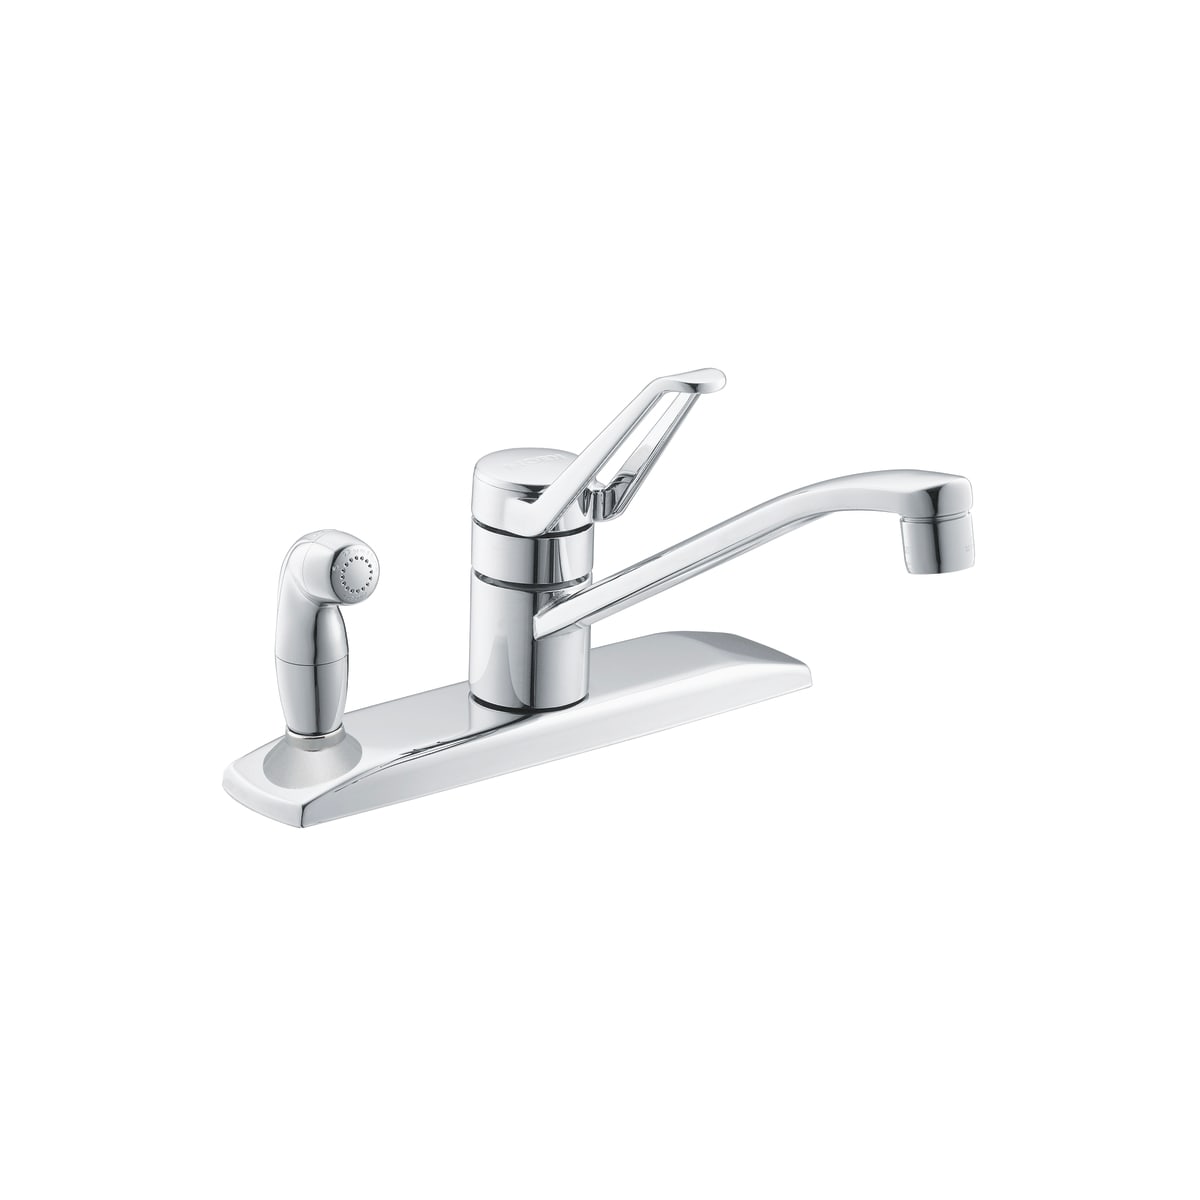 Moen 7231 Chrome Faucet Kitchen Single Handle From The Legend